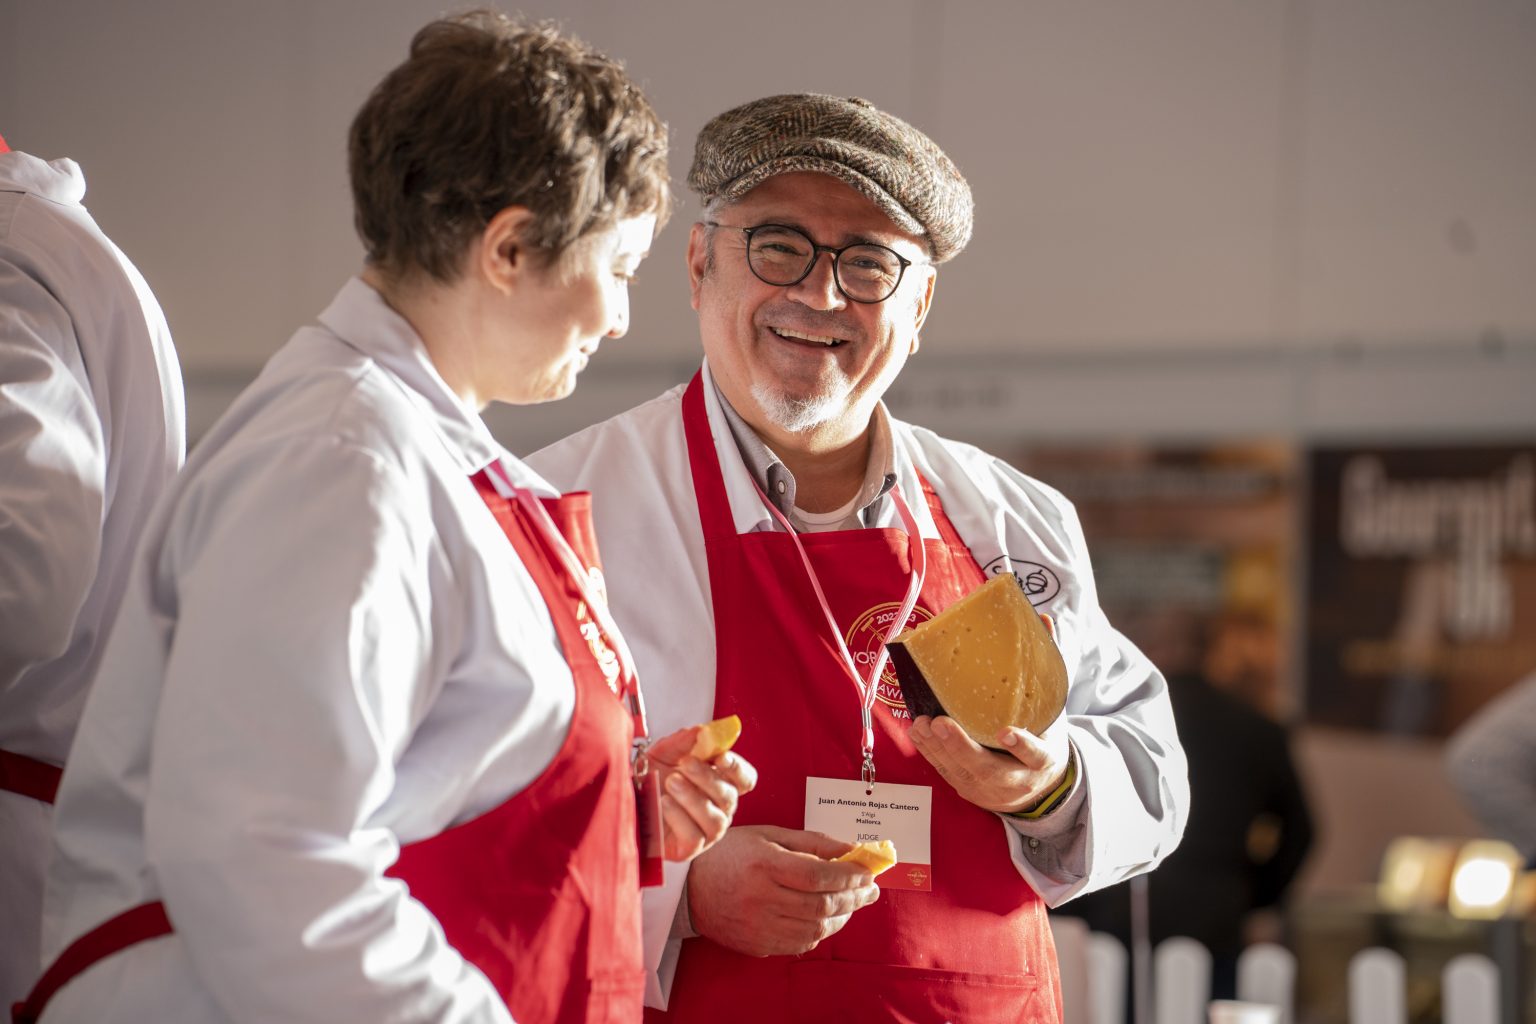 Cheesemakers, the World Cheese Awards 2023 is open for entries